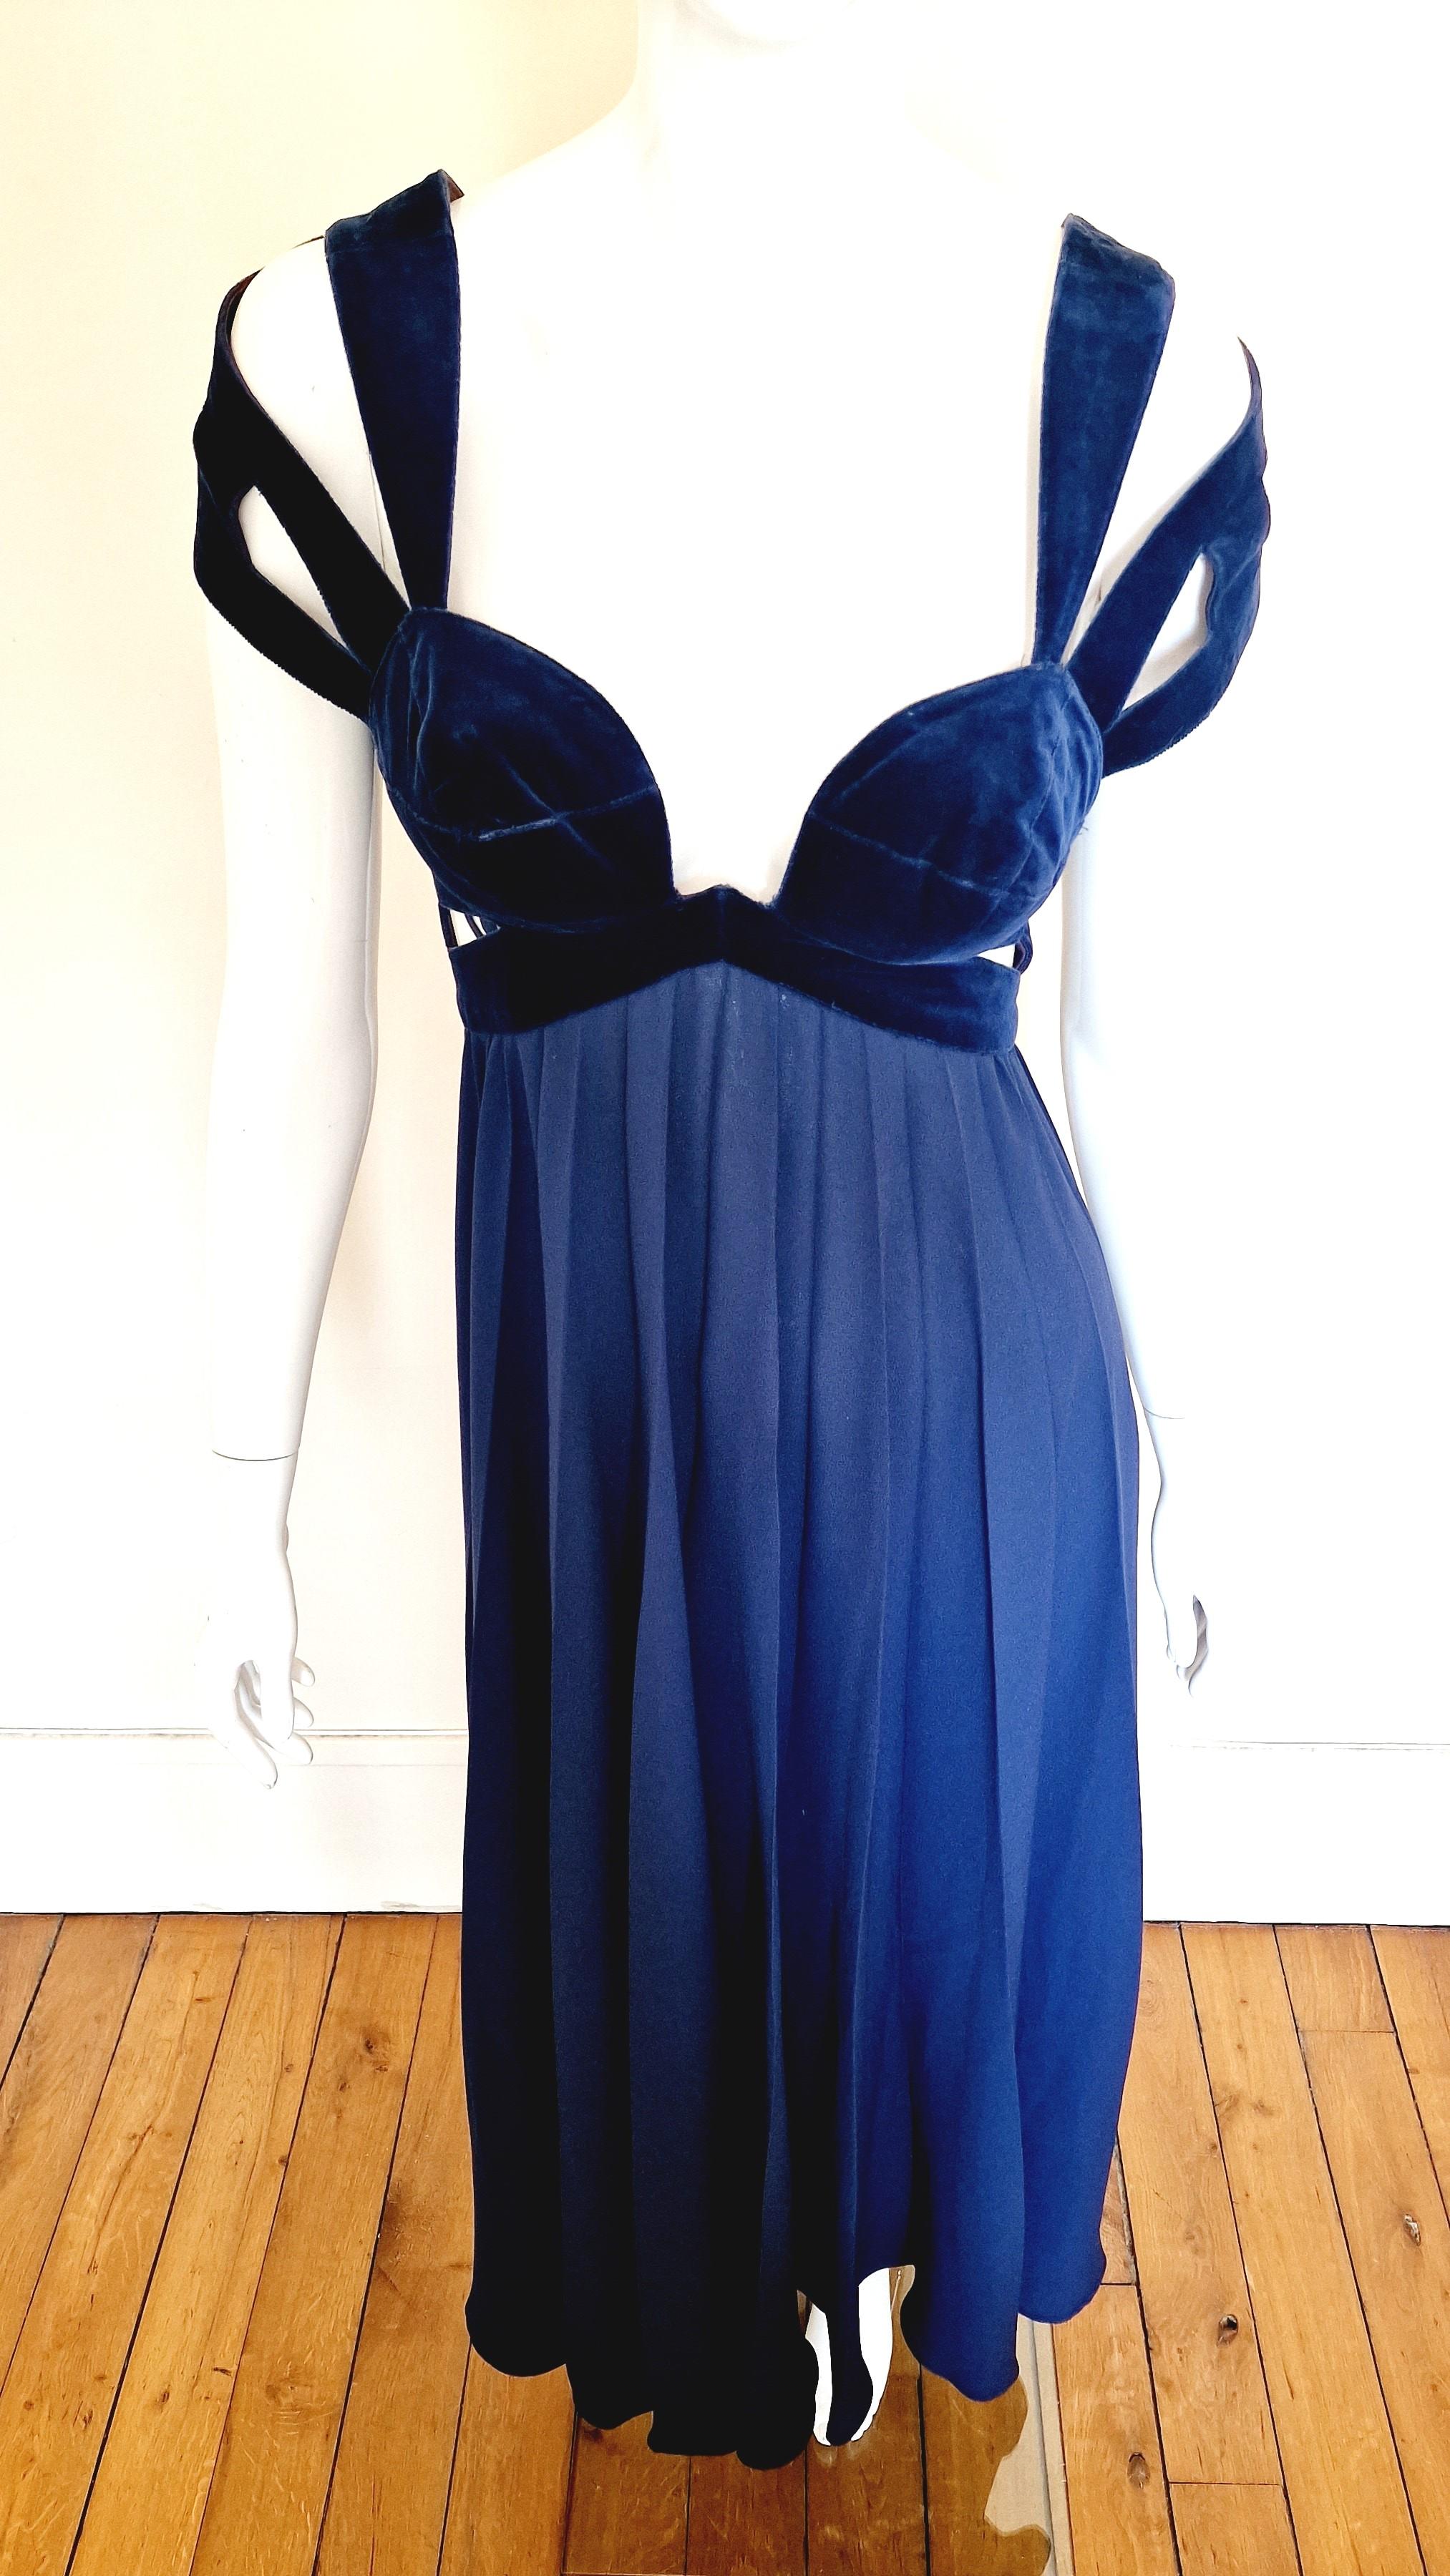 Thierry Mugler Runway 1992 S/S Cut-Out Demi Moore Blue Evening Maxi Dress Gown For Sale 5